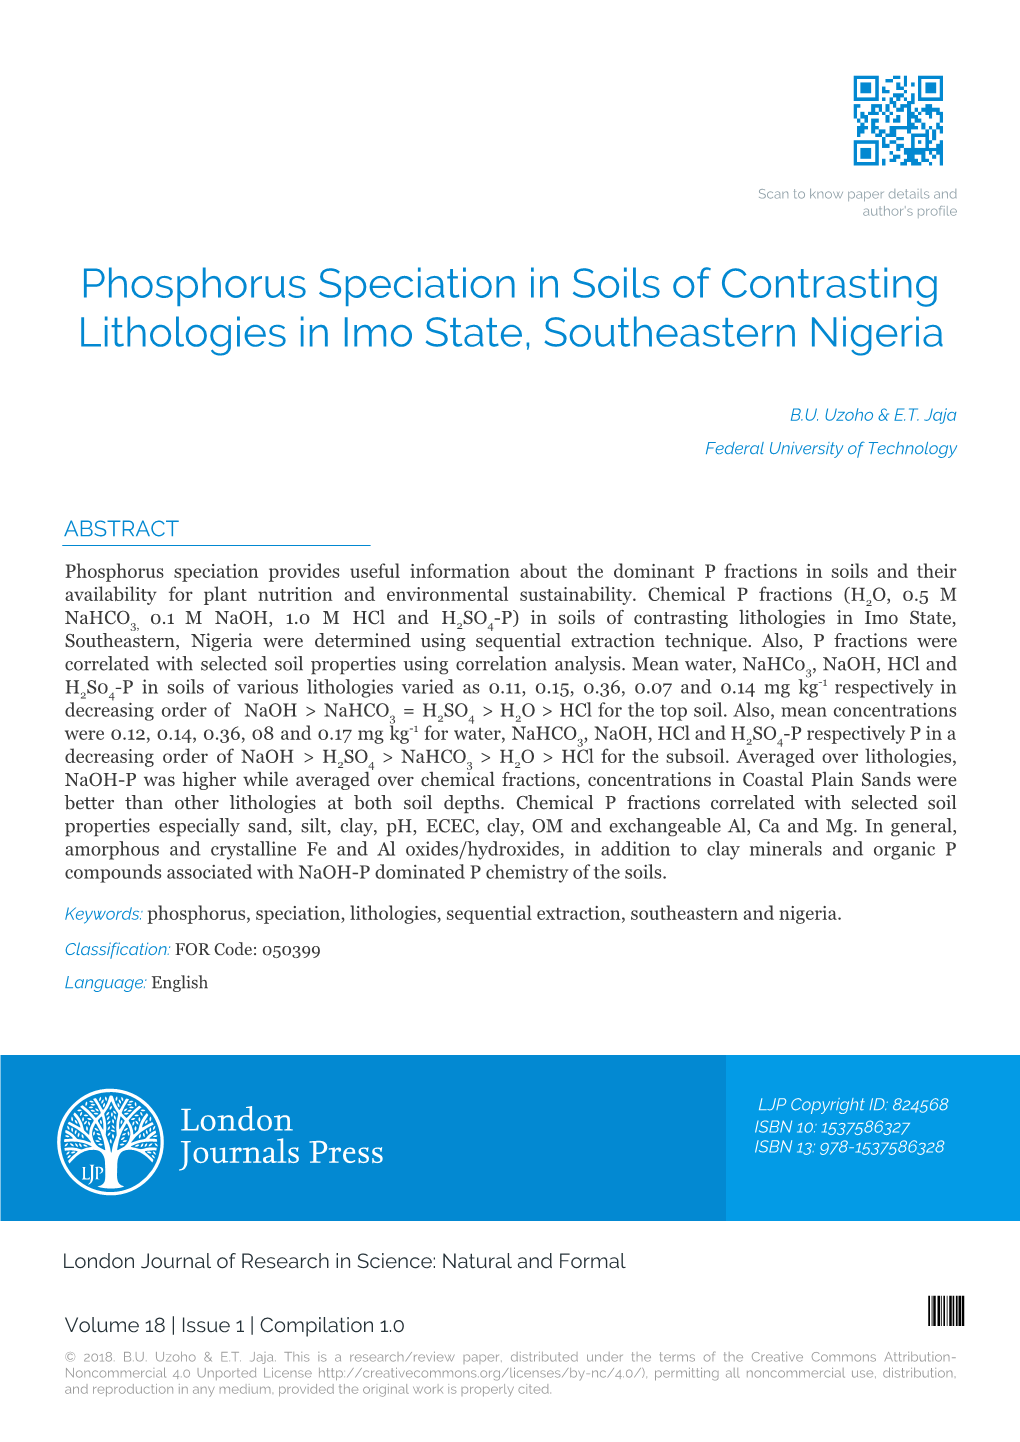 Phosphorus Speciation in Soils of Contrasting Lithologies in Imo State, Southeastern Nigeria